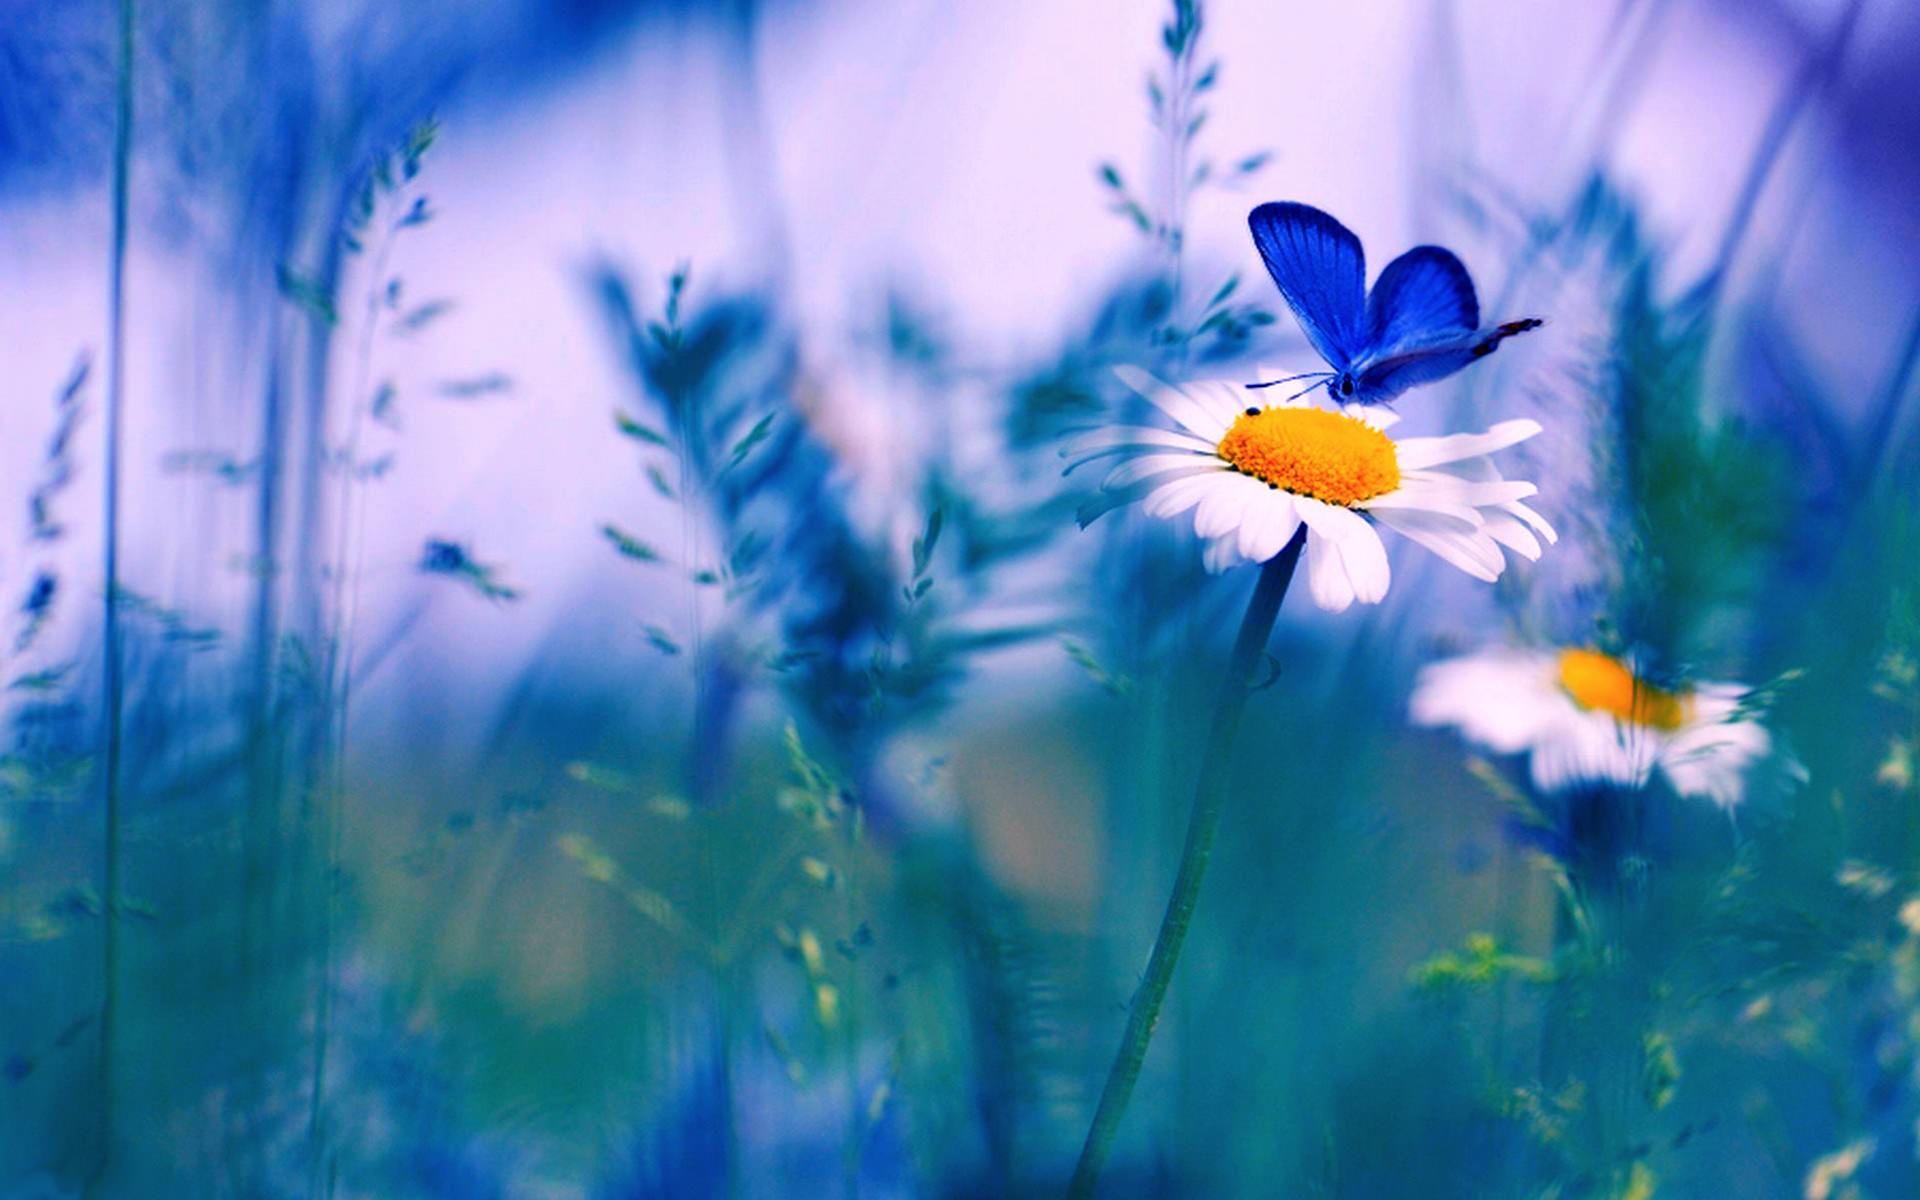 Spring Flowers And Butterflies Wallpaper Image